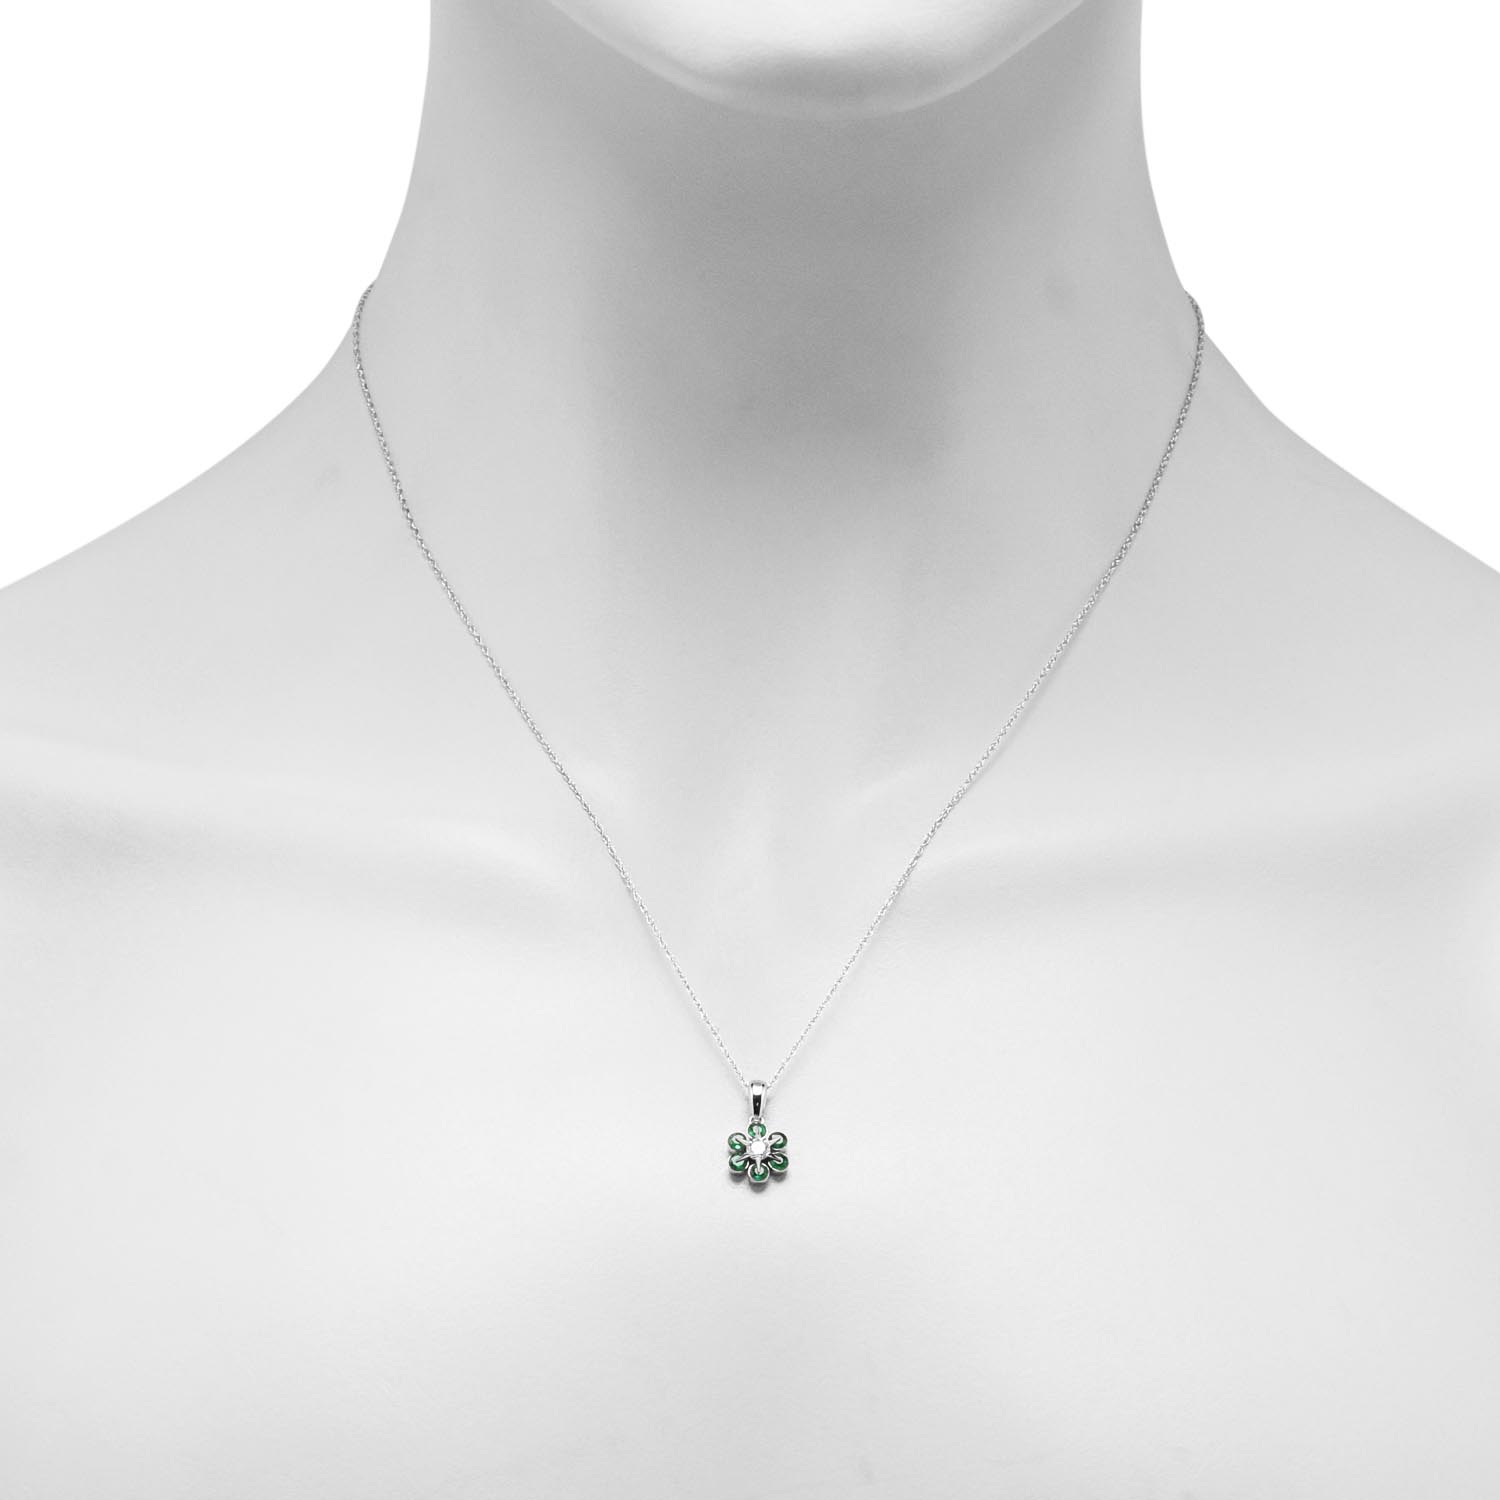 Emerald Flower Necklace in 14kt White Gold with Diamond (1/10ct)